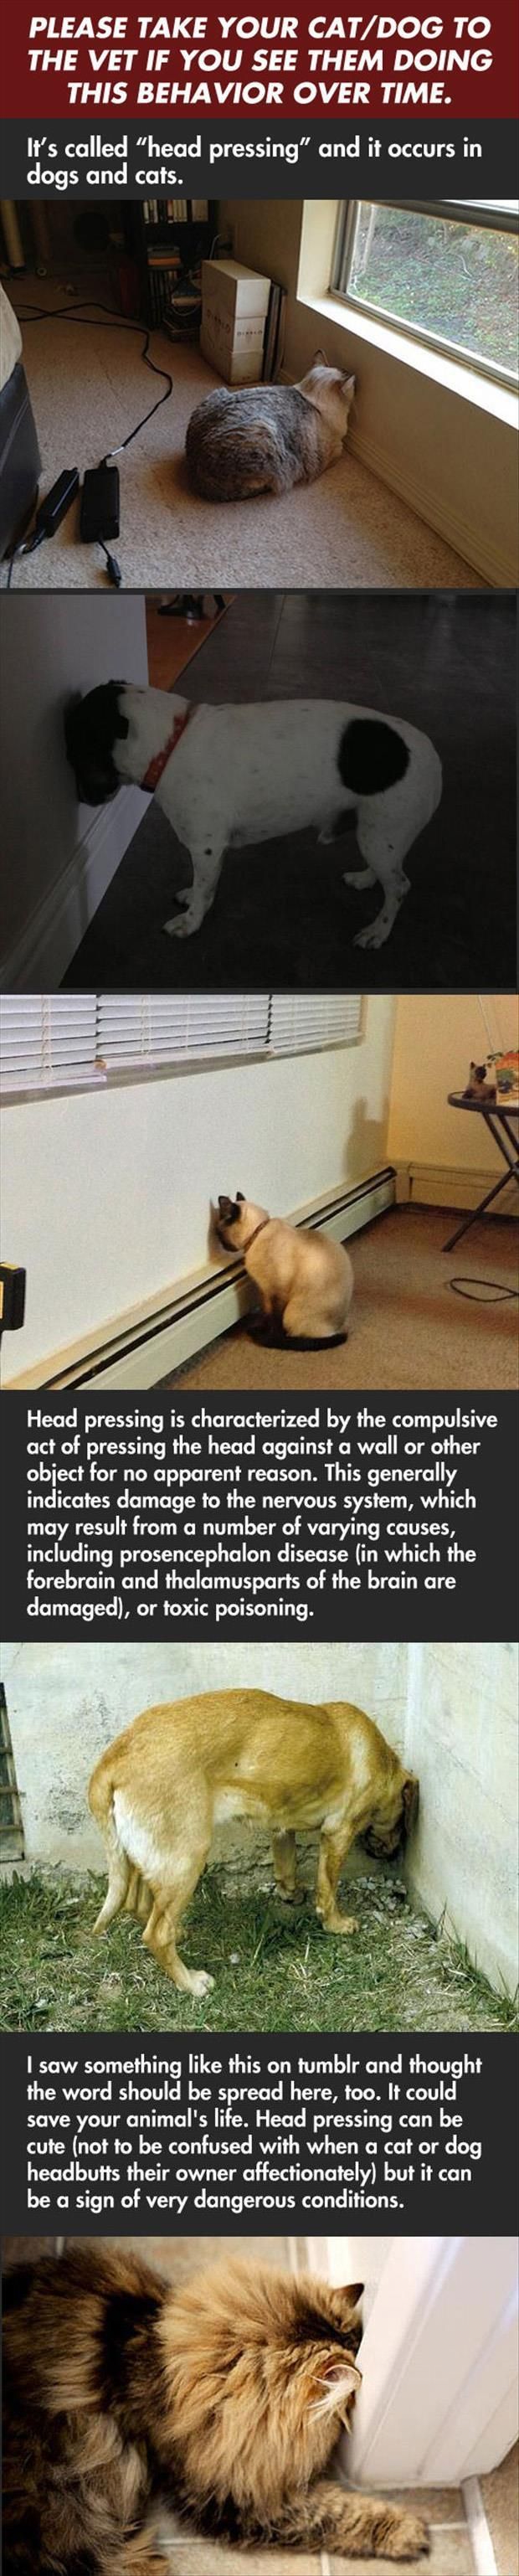 “Head Pressing” by dogs and cats. Did a search and confirmed this is legit. Link to page on Pet MD site with more information.